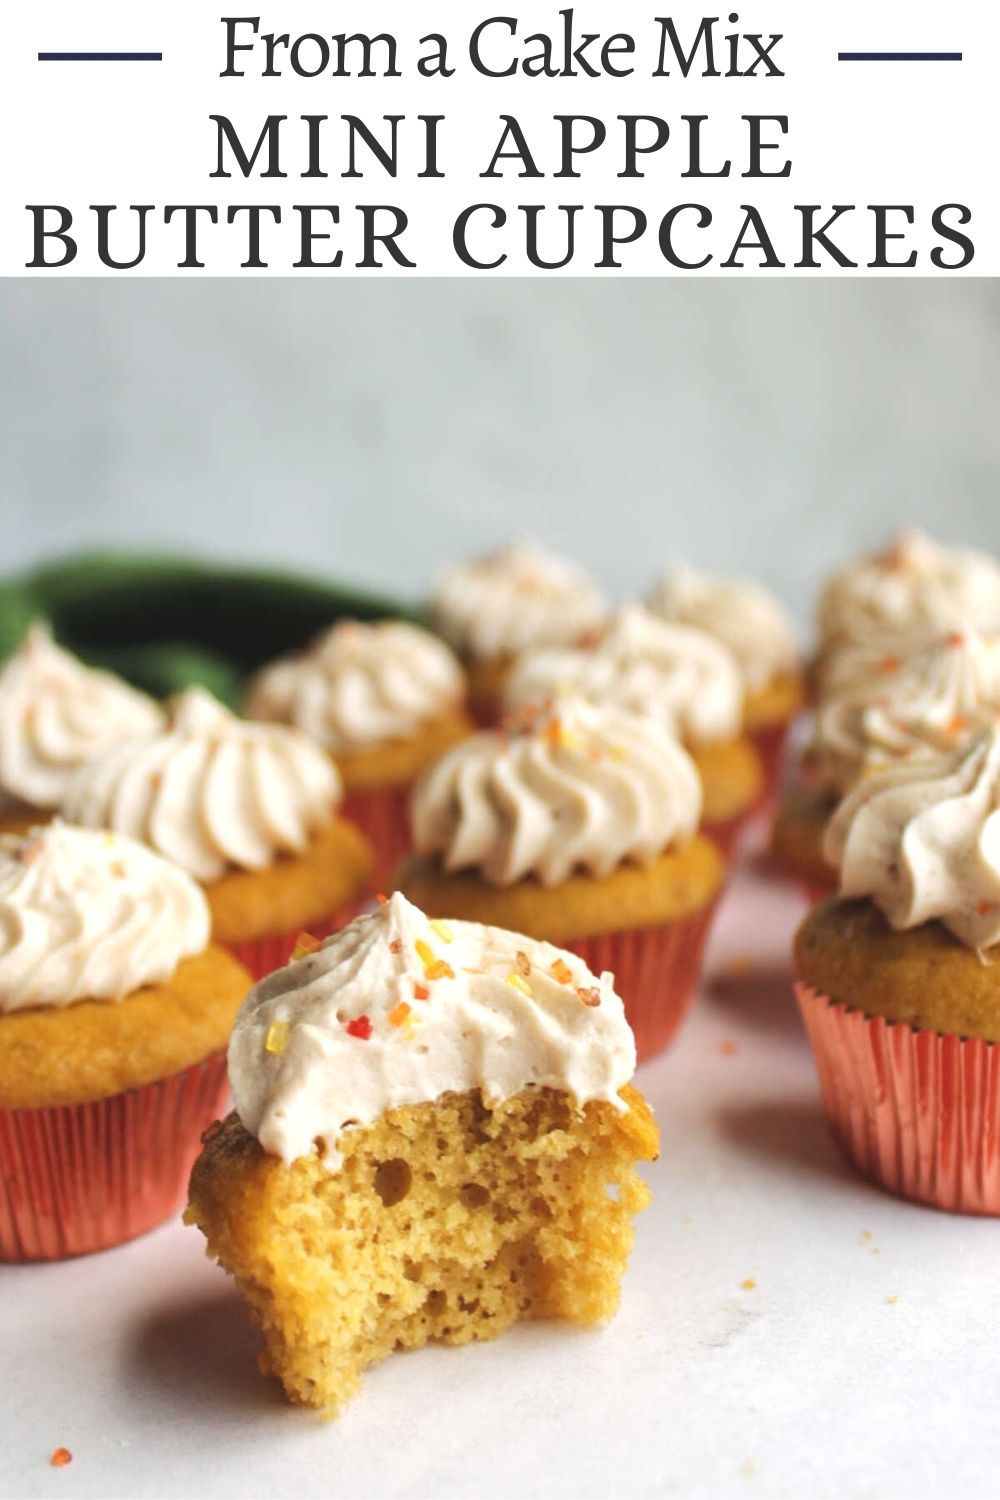 These cute little two bite mini apple butter cupcakes are super simple to put together. They only take 4 ingredients to make and they are perfect for fall.